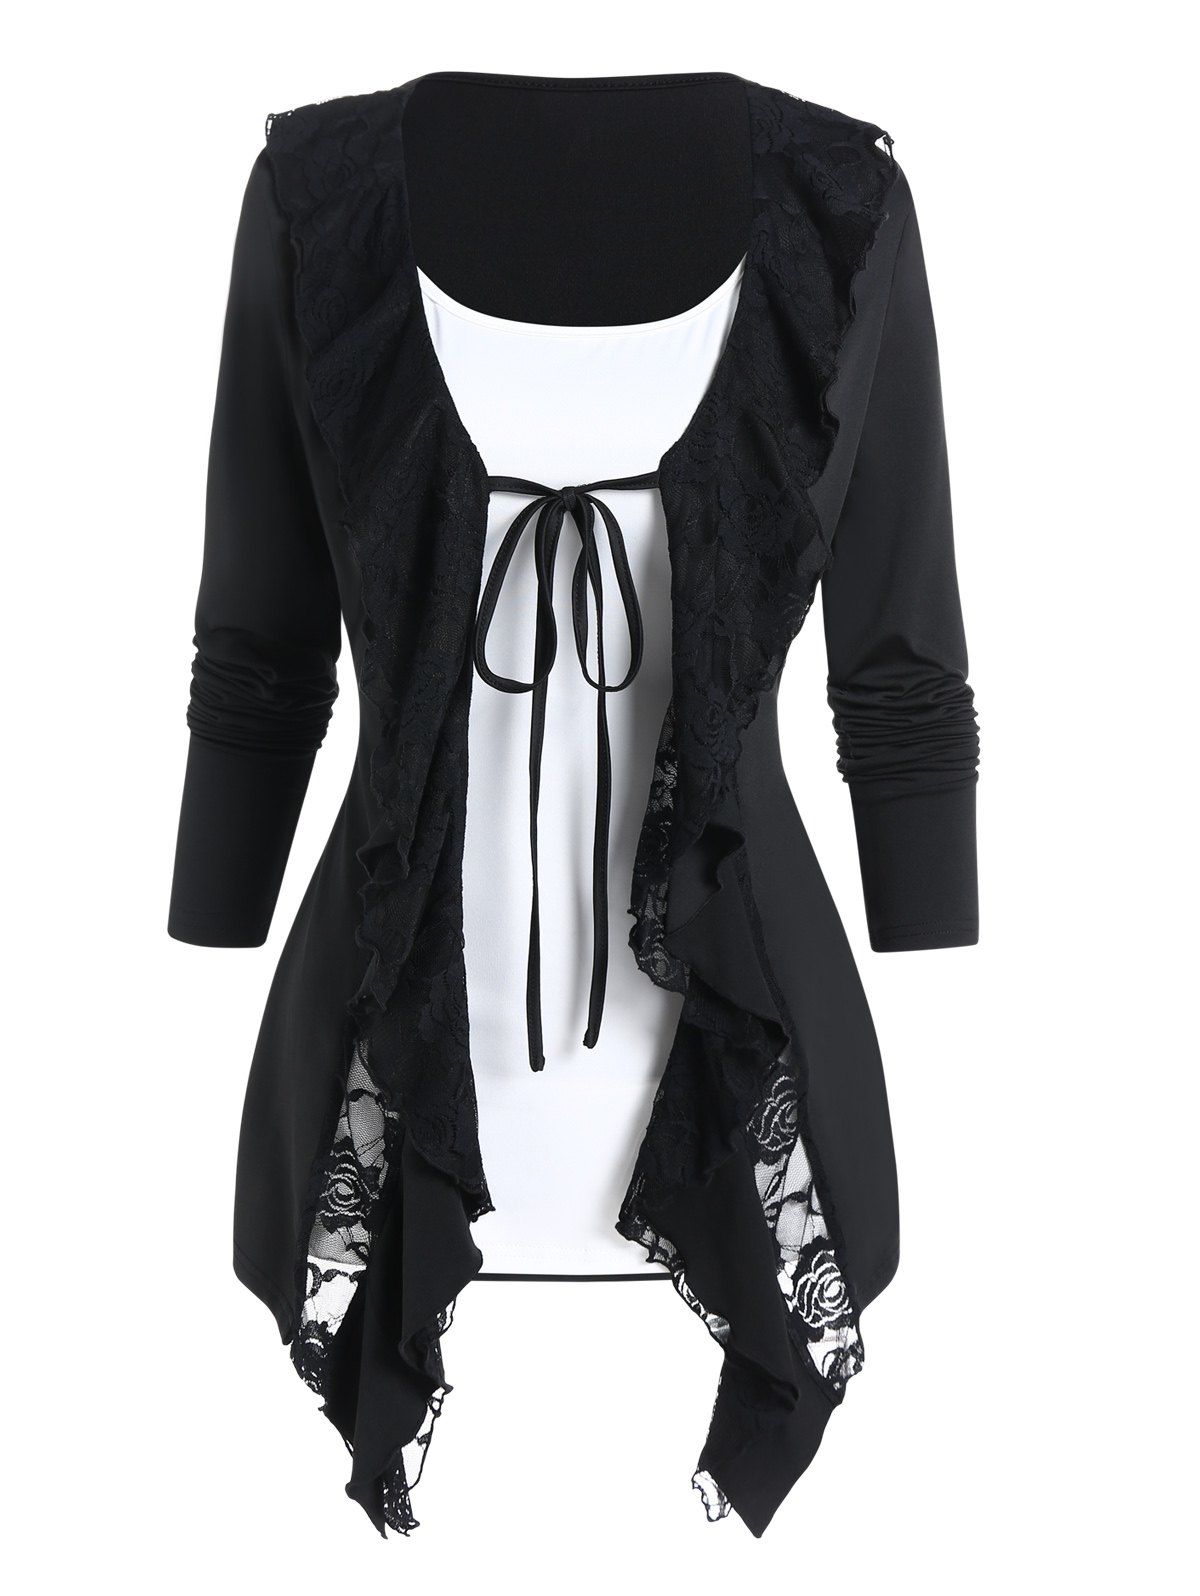 Contrast Colorblock Tee Frilled Flower Lace Panel Long Sleeve Faux Twinset T Shirt - BLACK L